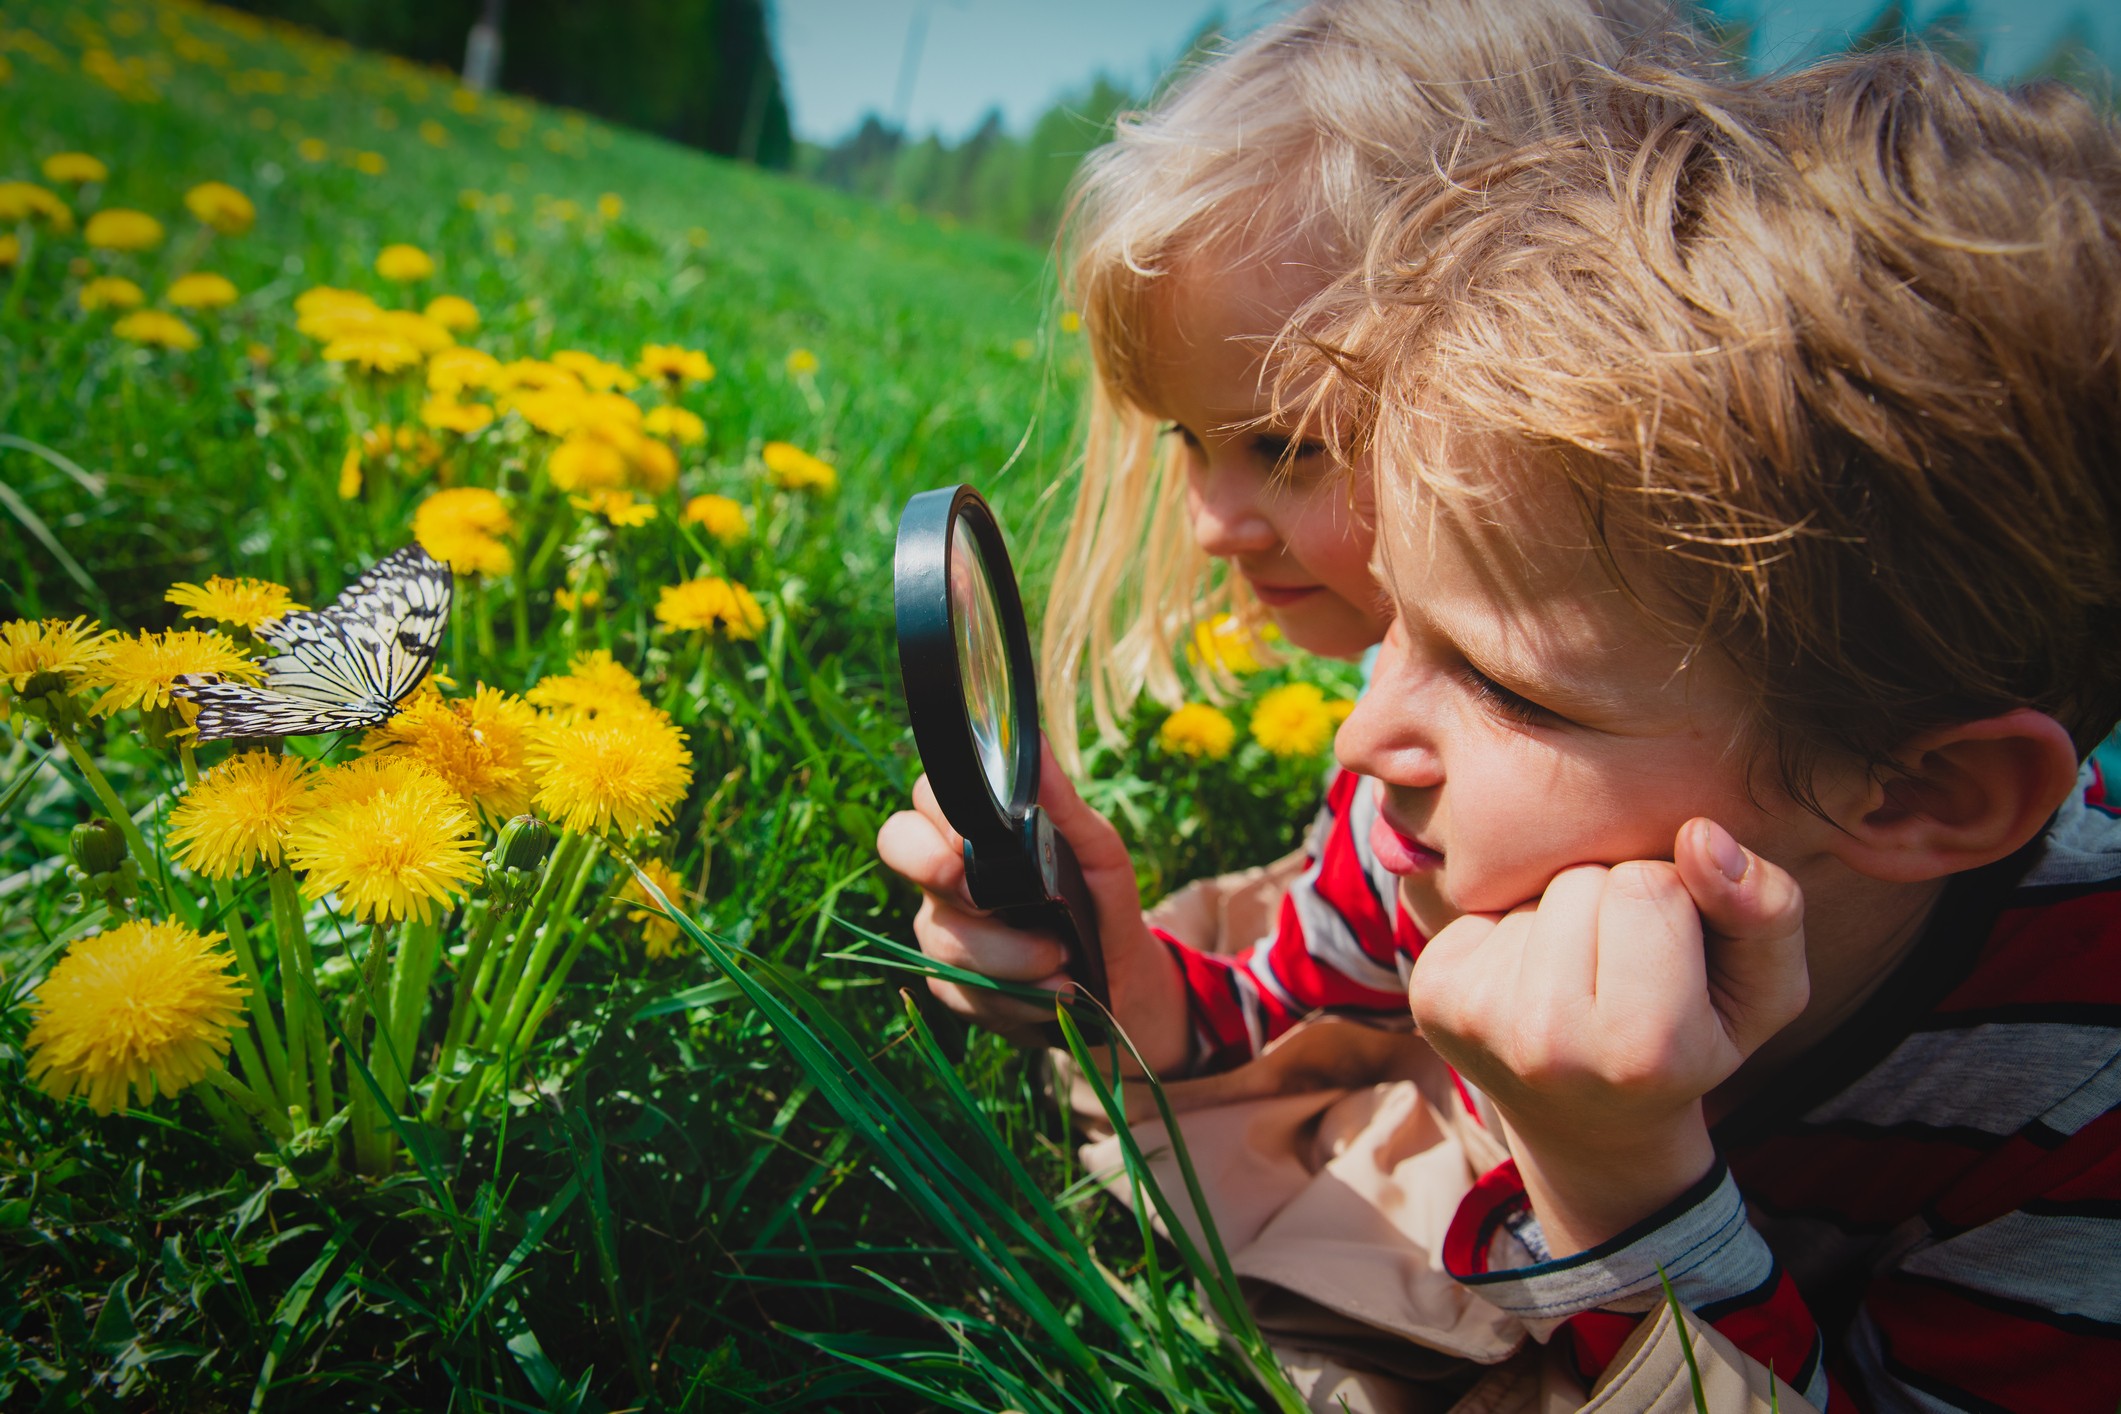 Two homeschooled children learning outside, looking at a butterfly through a magnifying glass